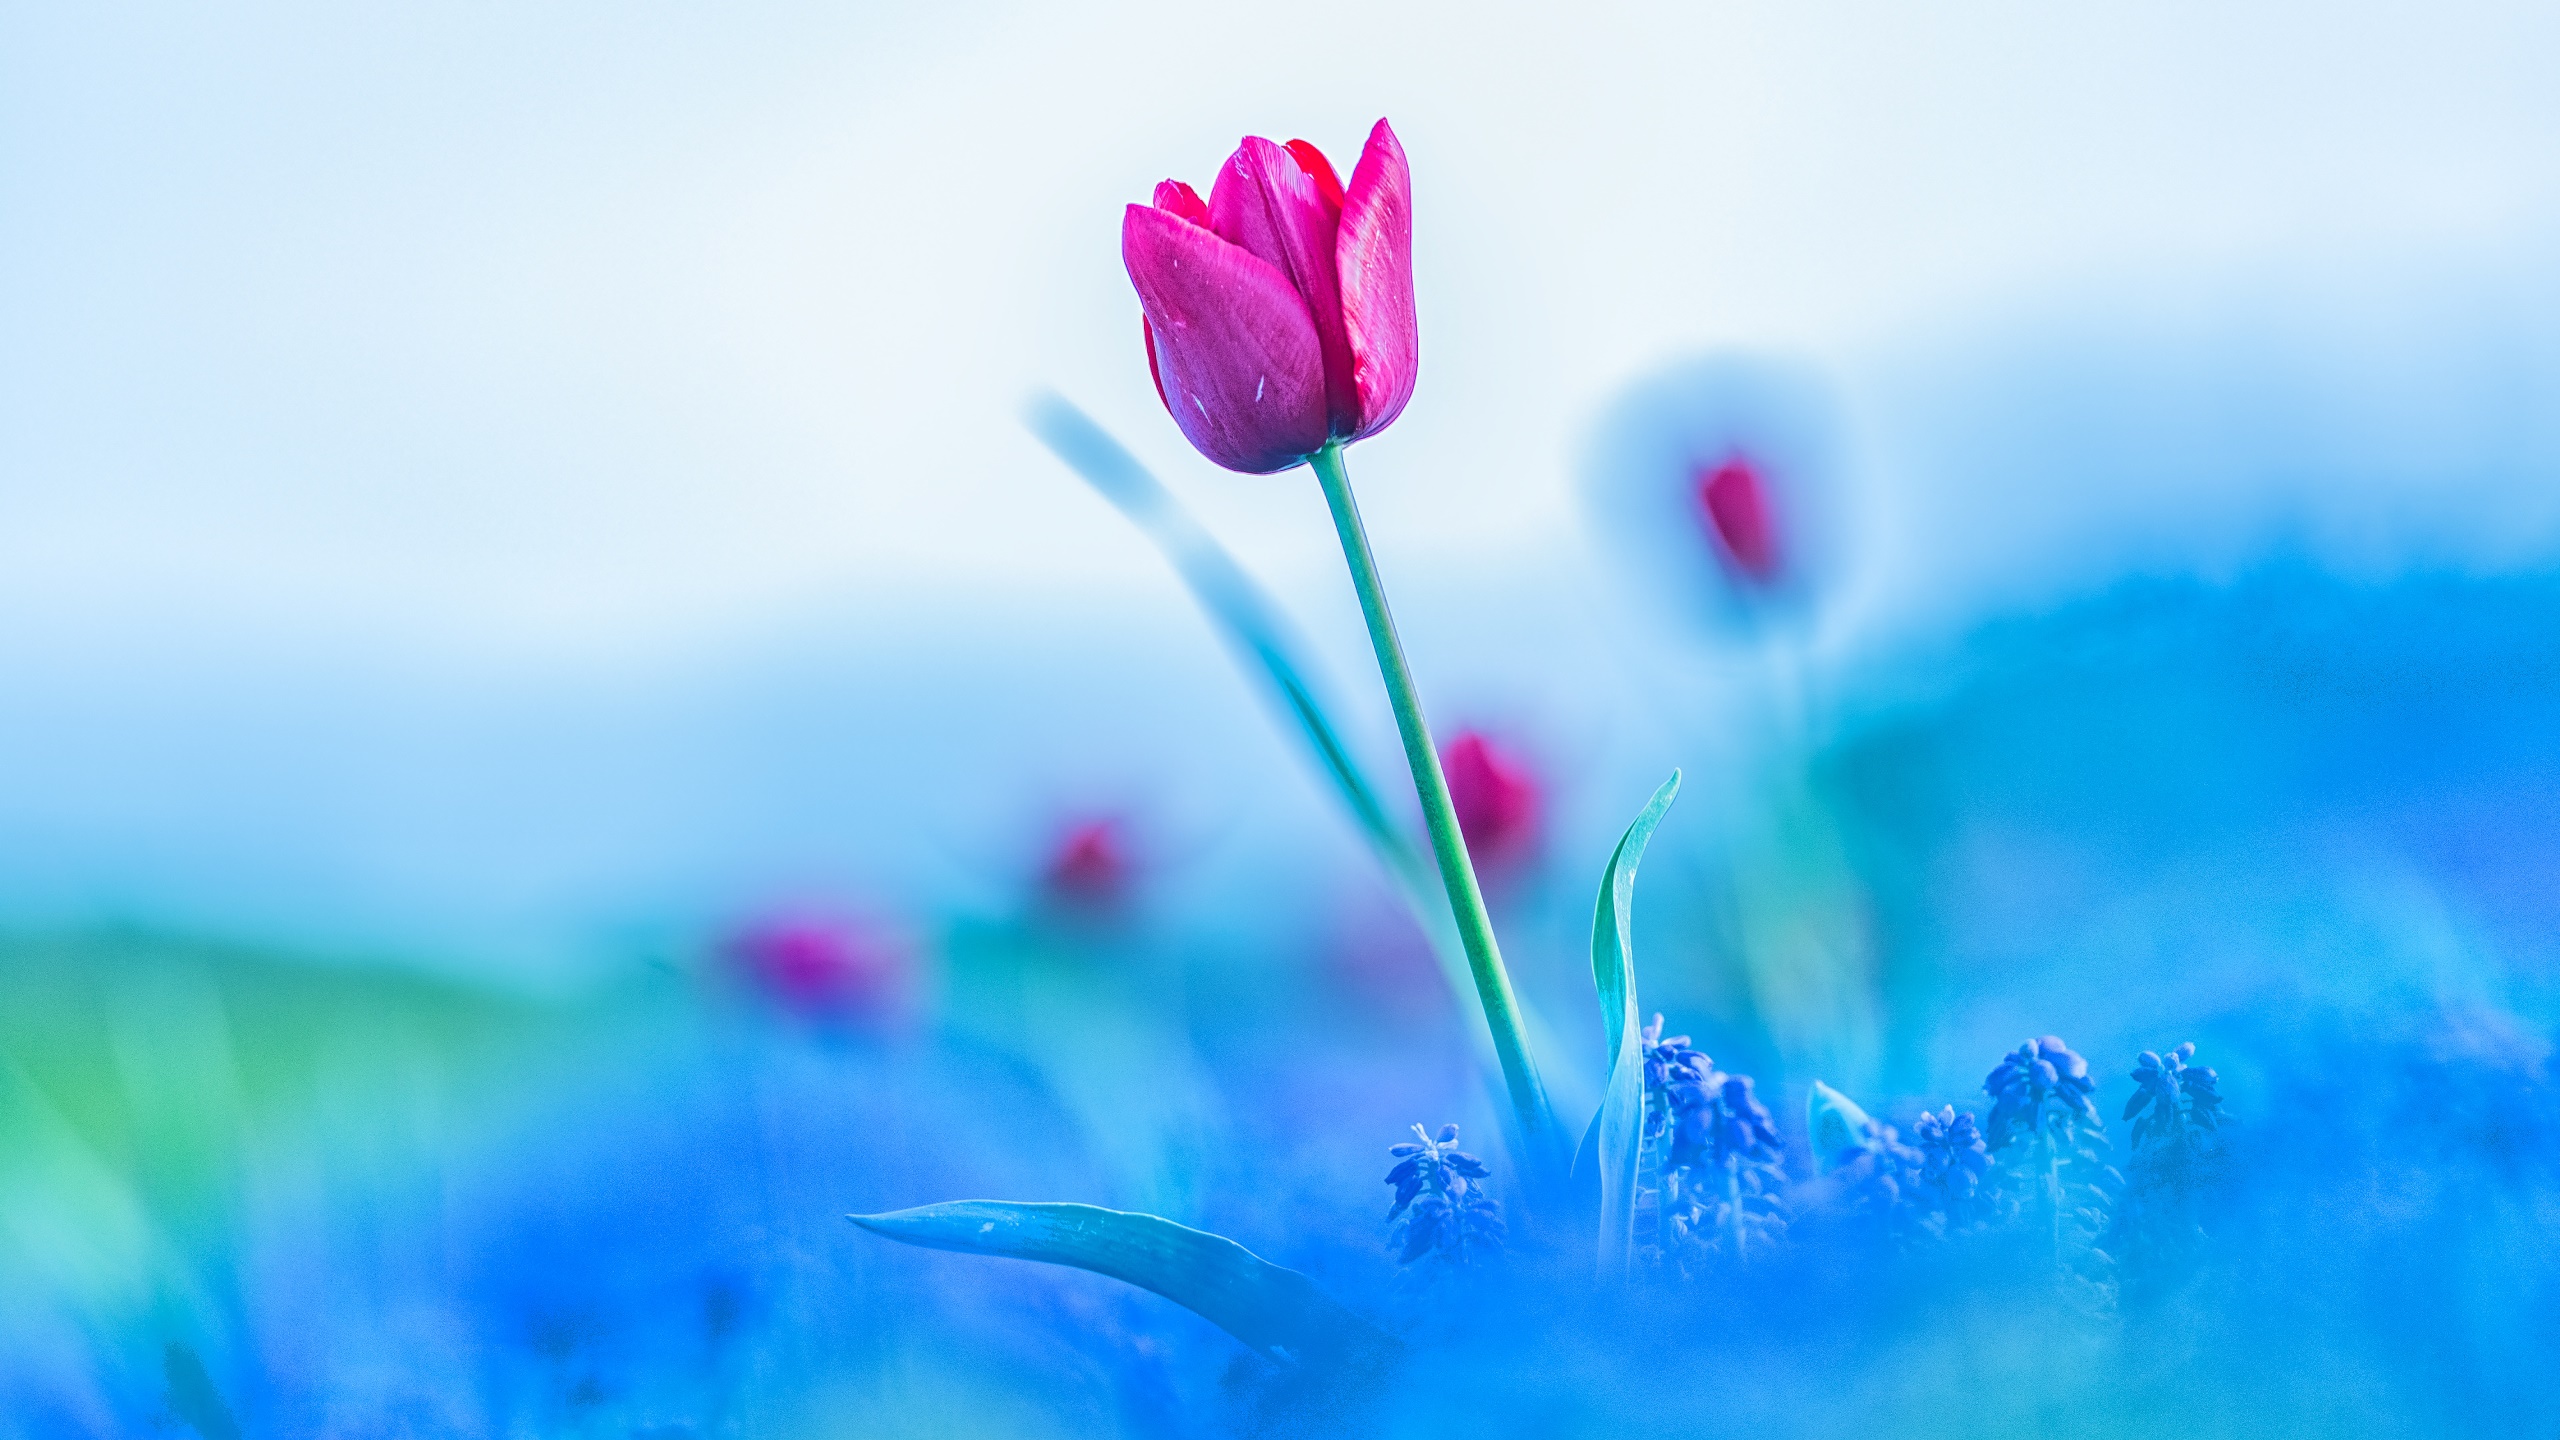 General 2560x1440 colorful flowers plants blue tulips